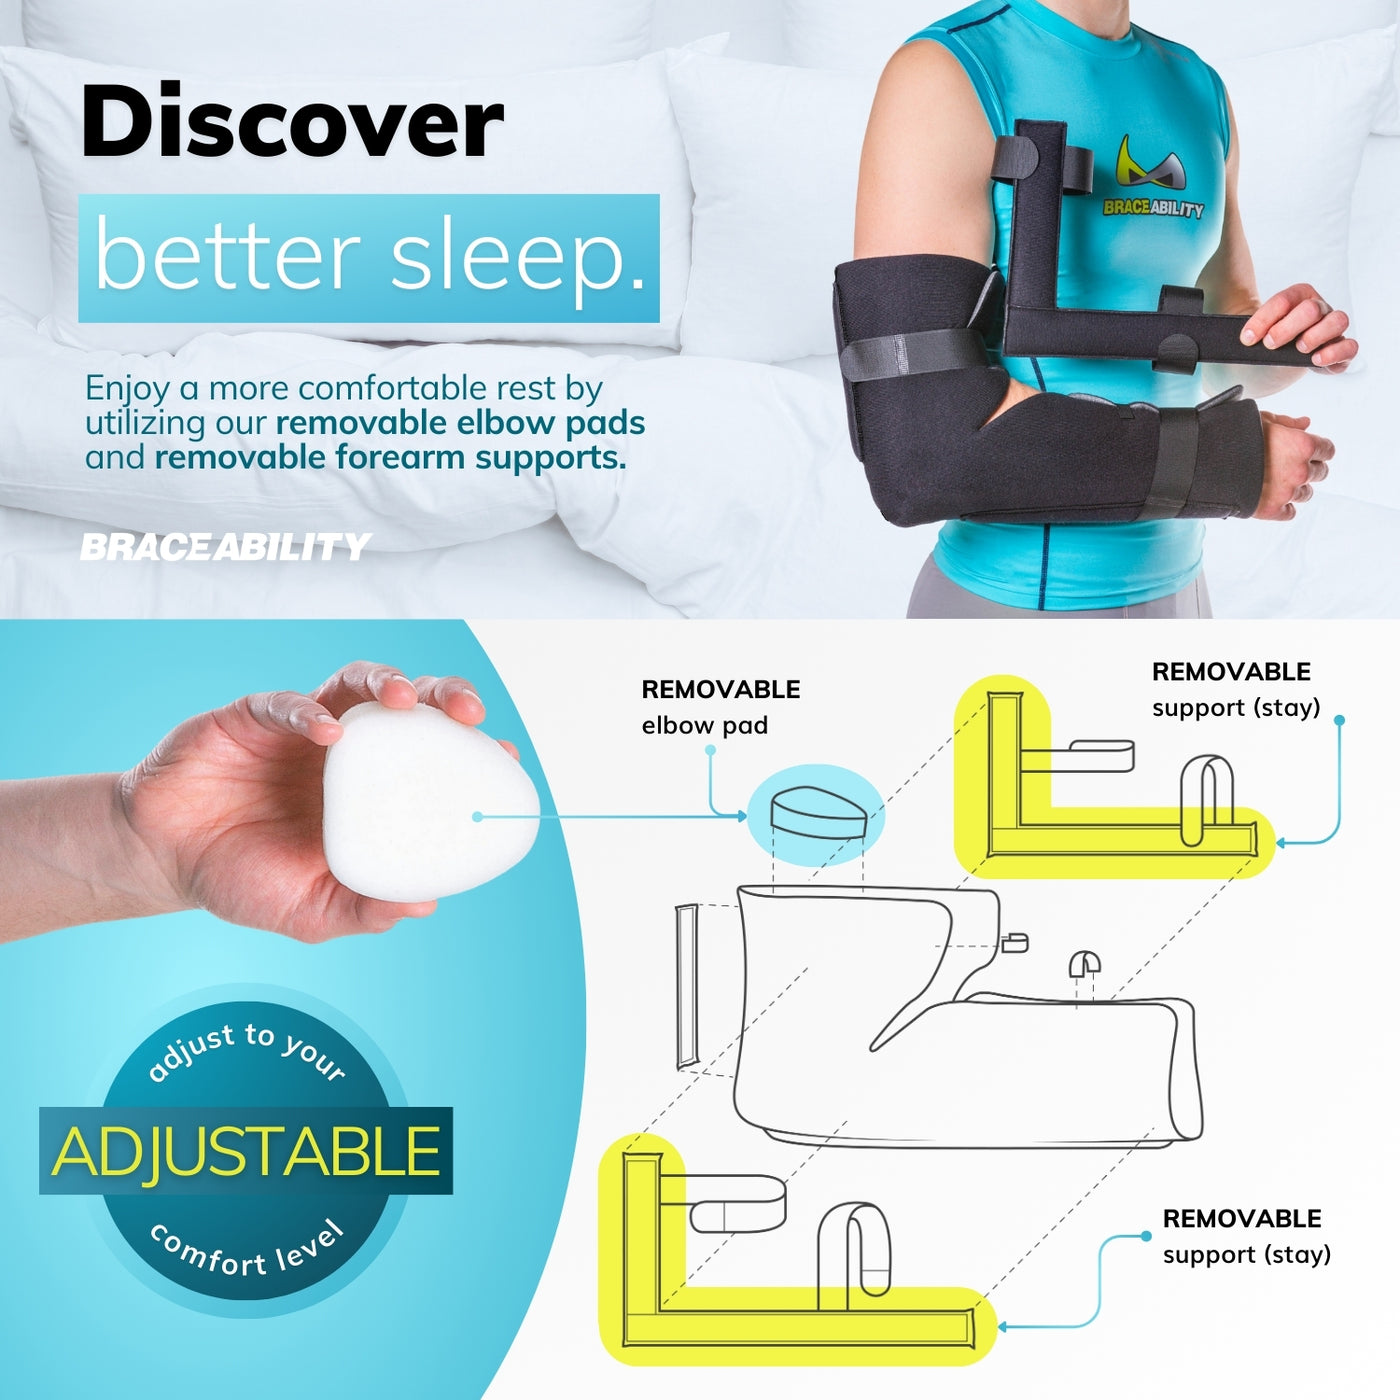 Replace your standard arm sling with our soft, padded arm splint for a safe and comfortable nights sleep